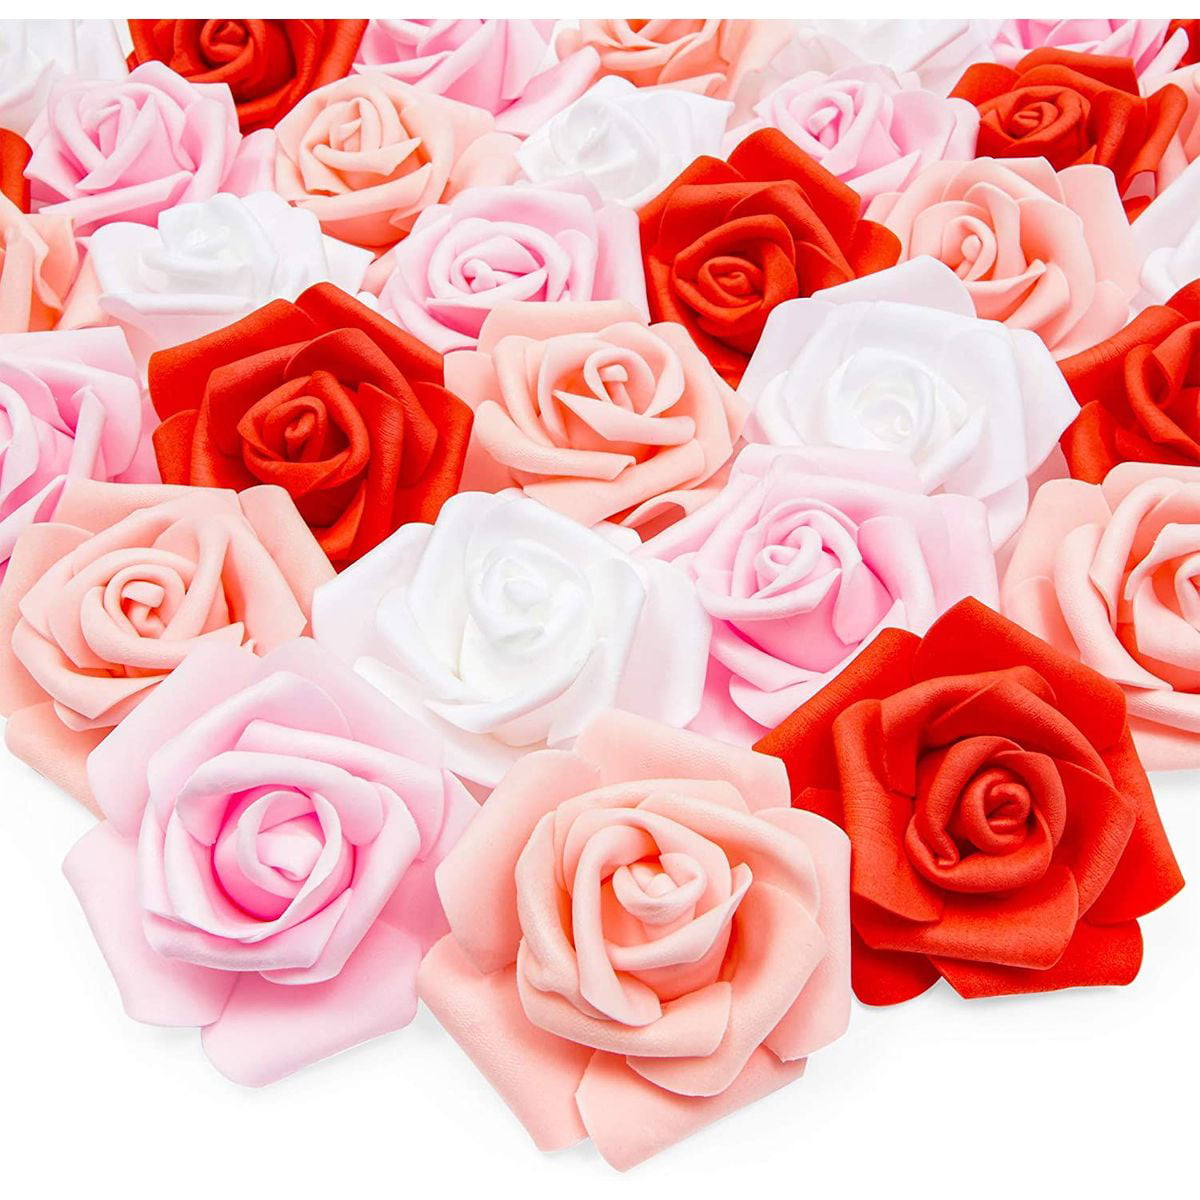 Details about   20pcs Artificial Flower Heads Big Rose 70mm Wedding Party Home Gold Decoration 